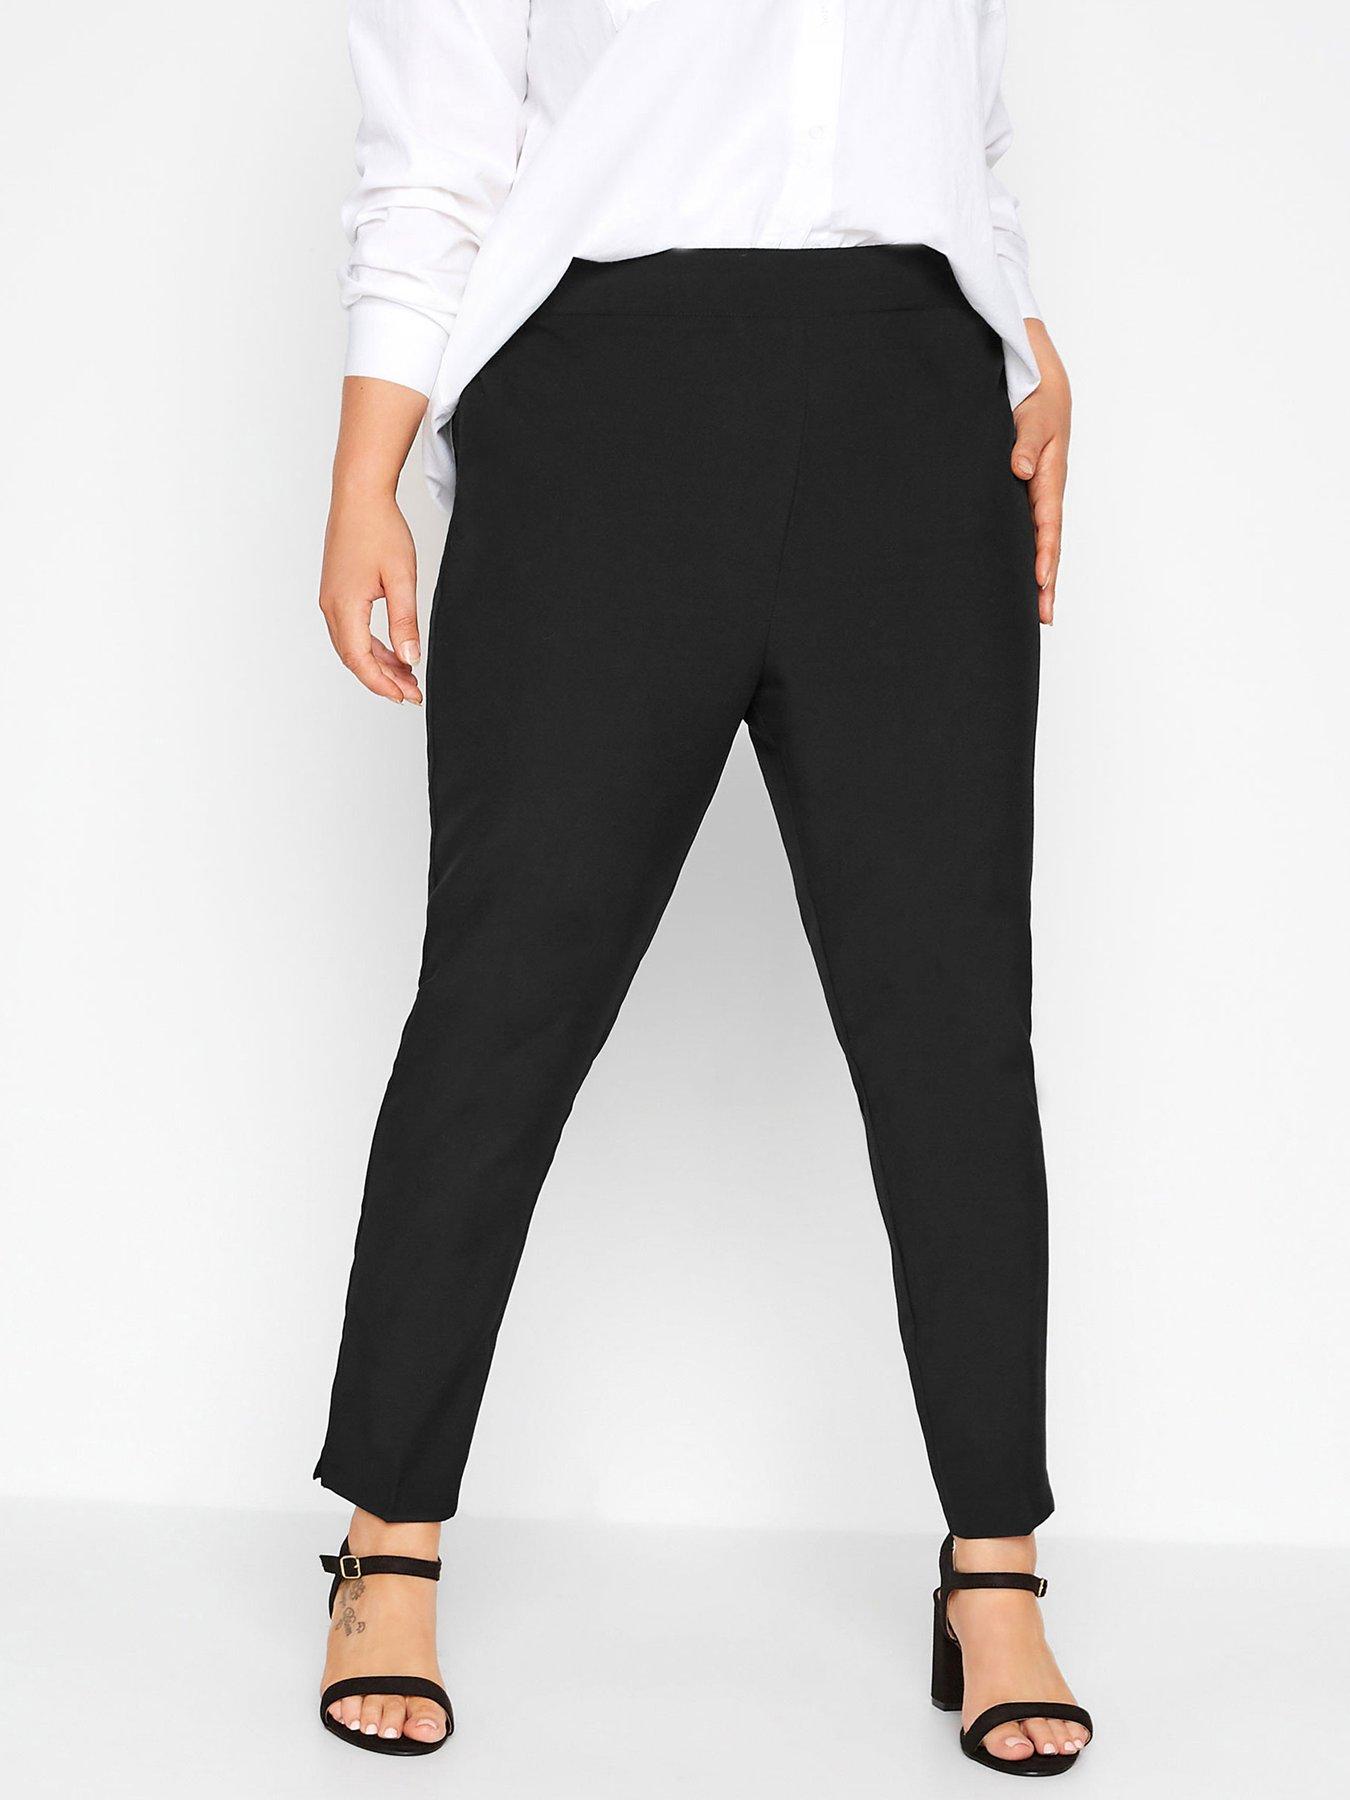 10 Plus-Size Friendly Workwear Picks For Going Back To The Office | Work  pants women, Work outfit, Stretch work pants